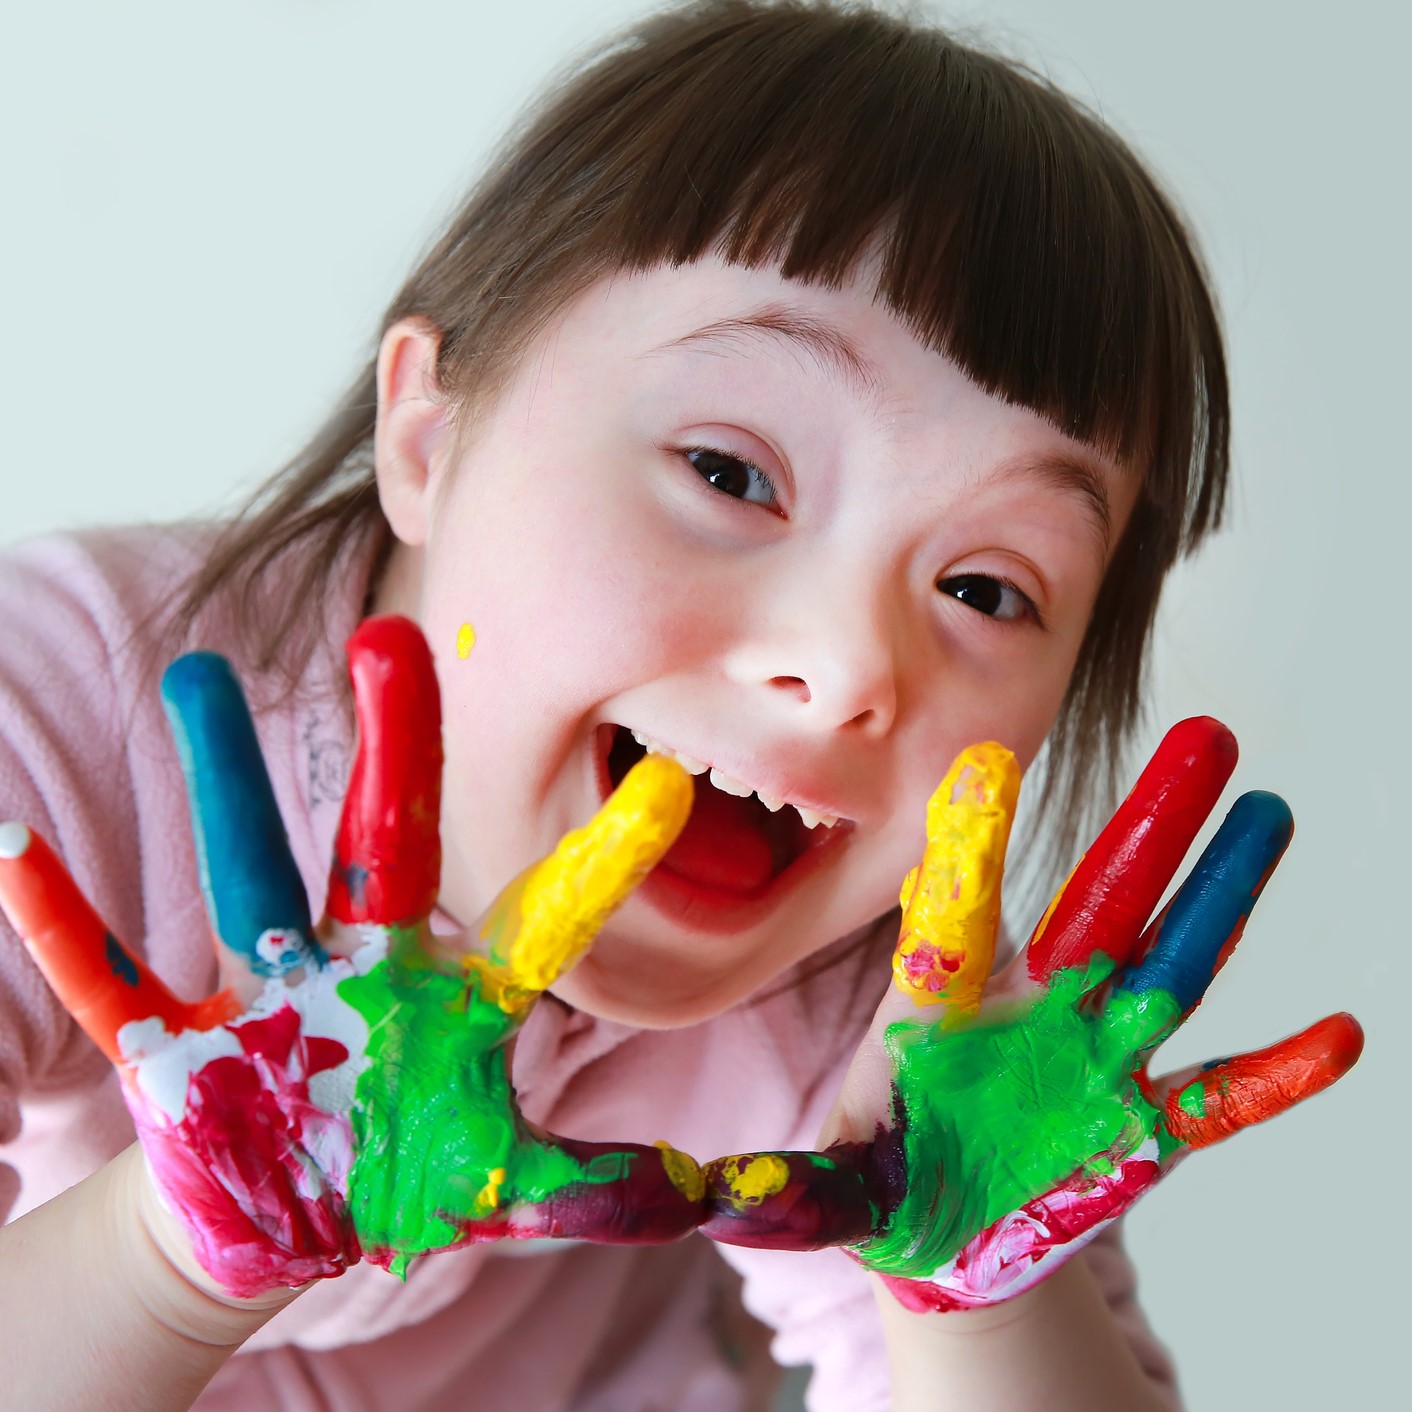 Cute little girl with painted hands.